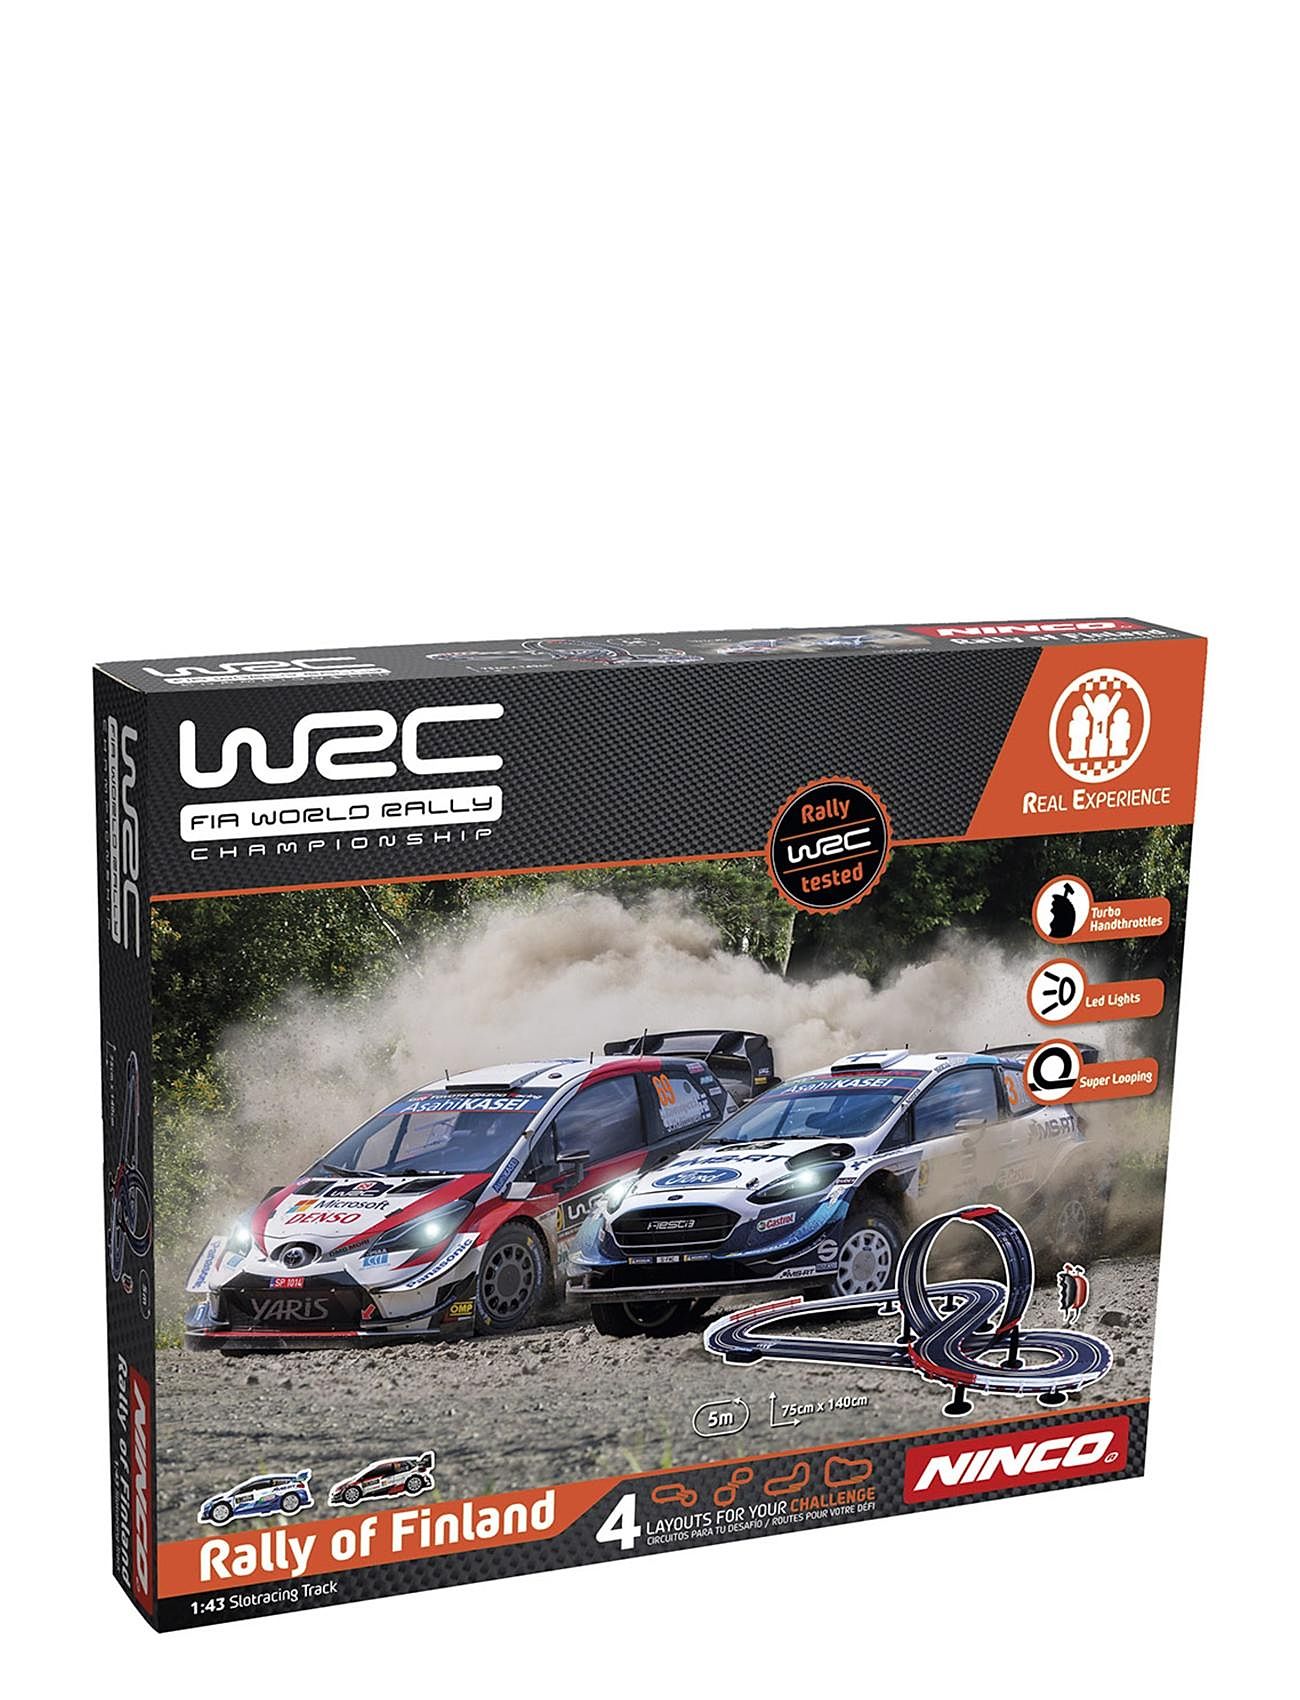 Ninco Wrc Rally Of Finland 4,7M Toys Toy Cars & Vehicles Race Tracks Multi/patterned Ninco